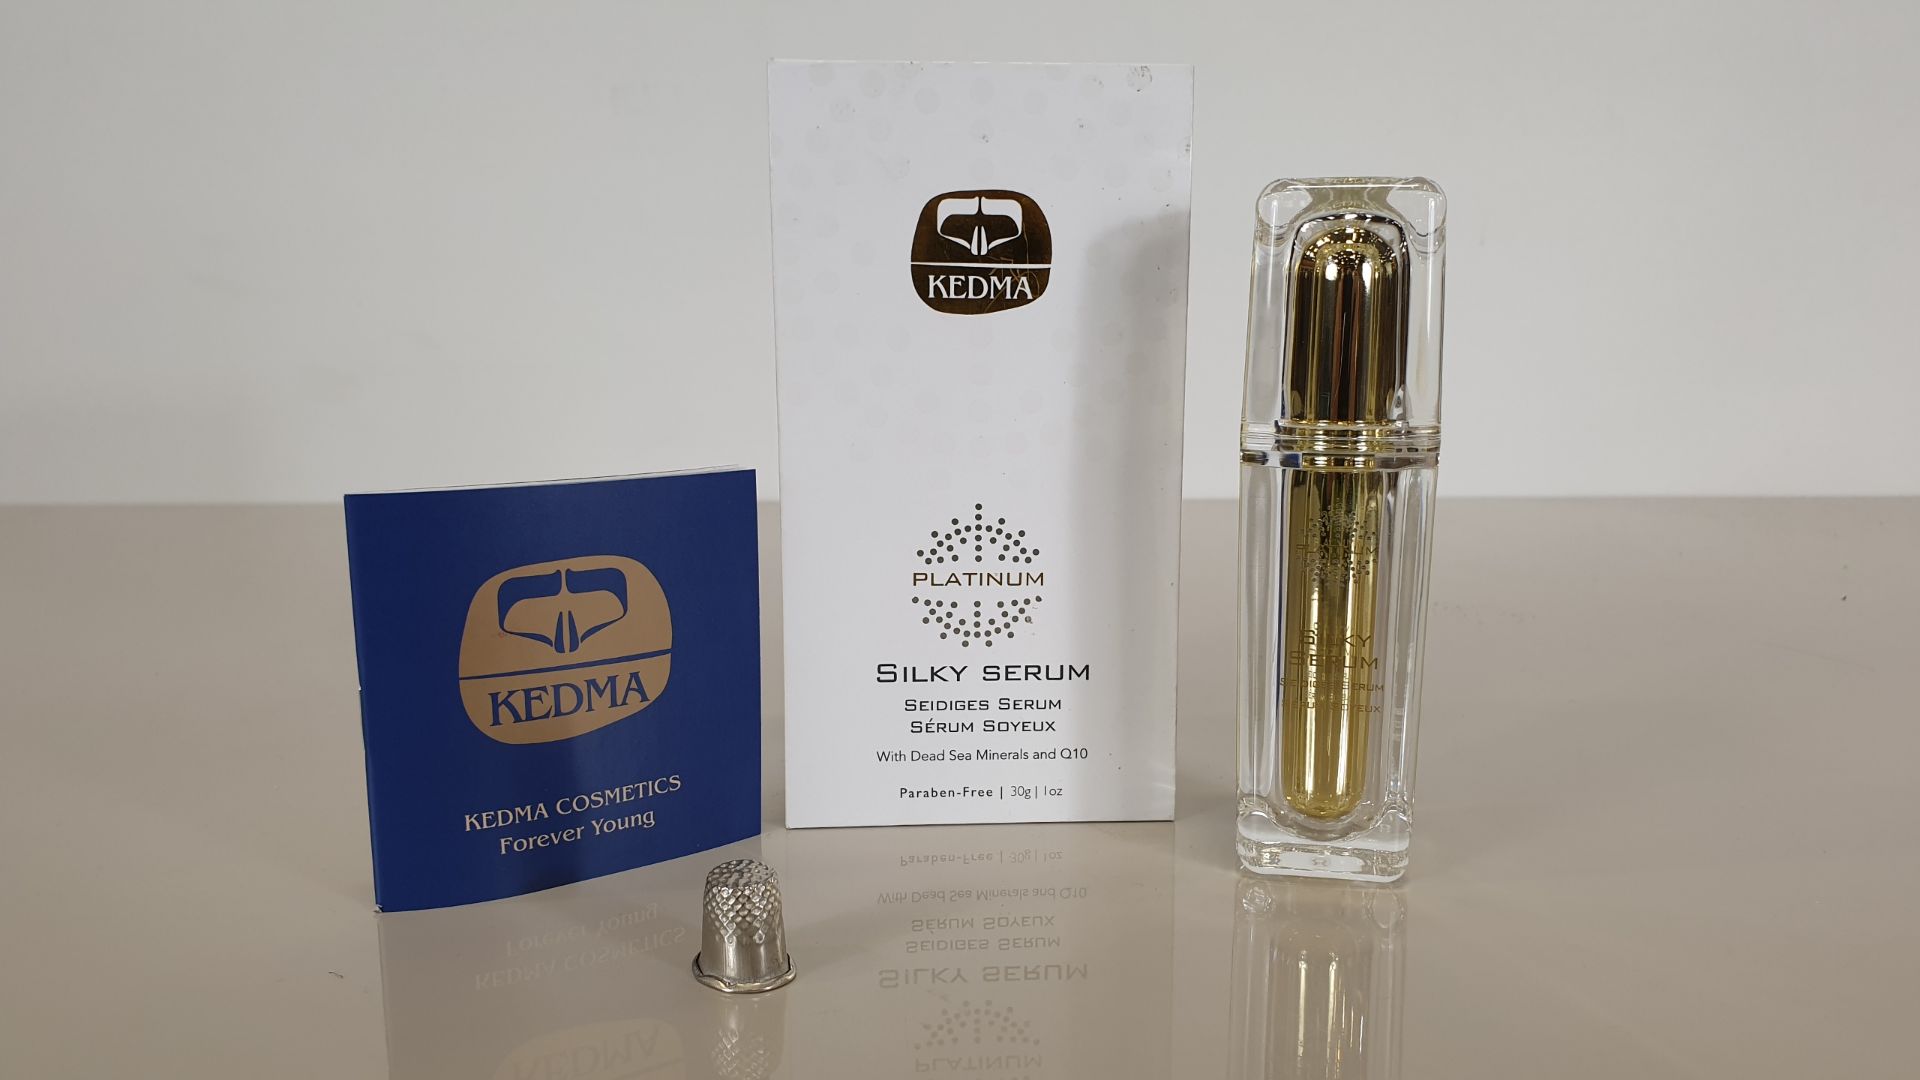 (LOT FOR THURSDAY 28TH MAY AUCTION) 4 X BRAND NEW KEDMA PLATINUM SILKY SERUM WITH DEAD SEA